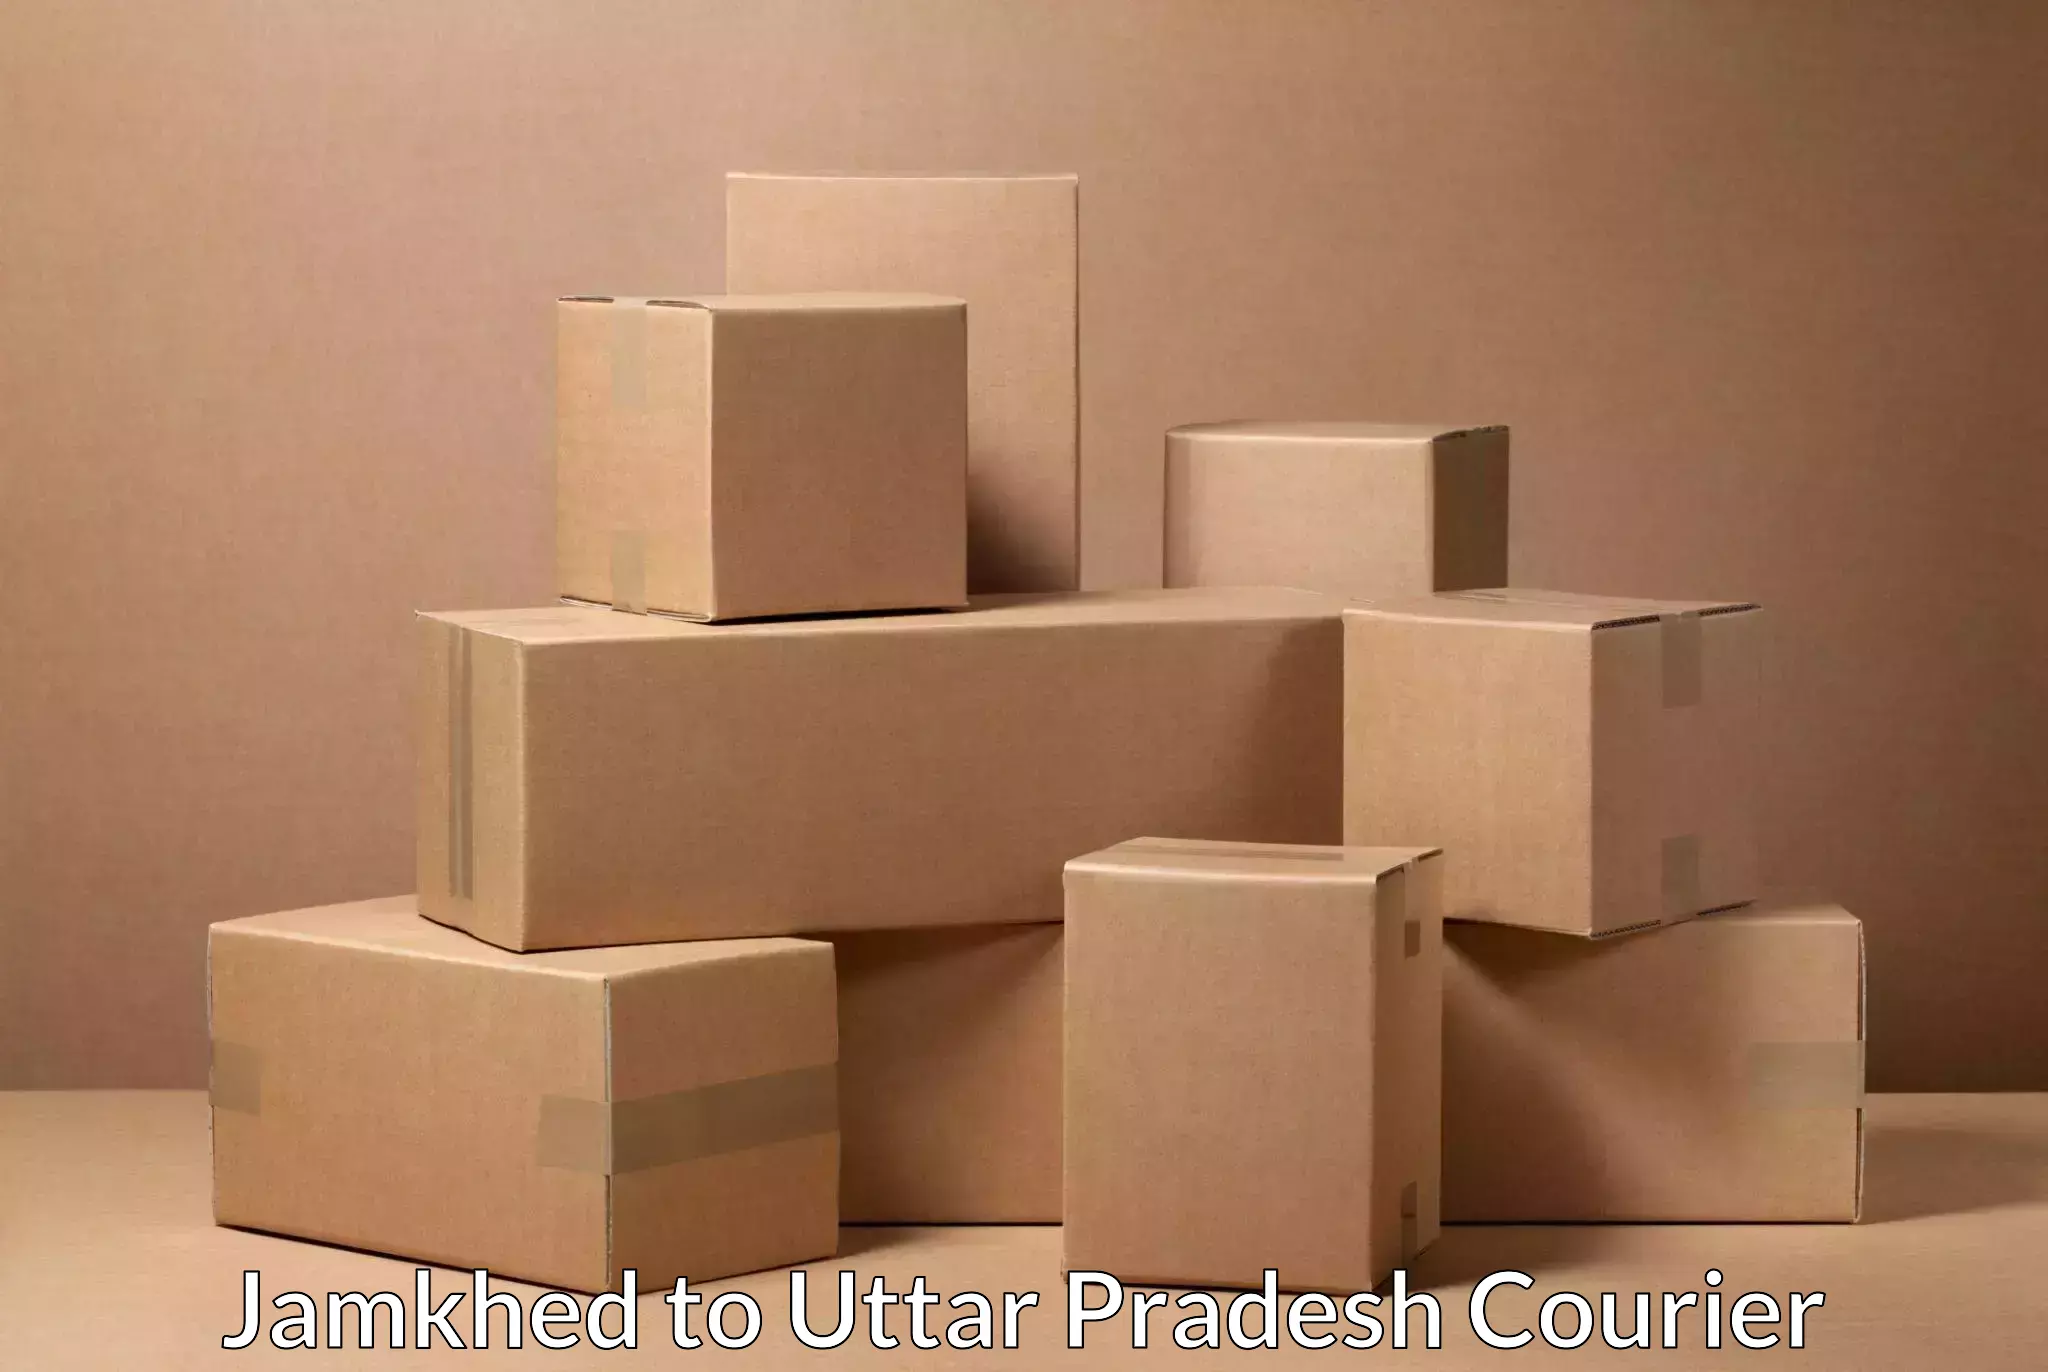 Seamless shipping experience Jamkhed to Agra